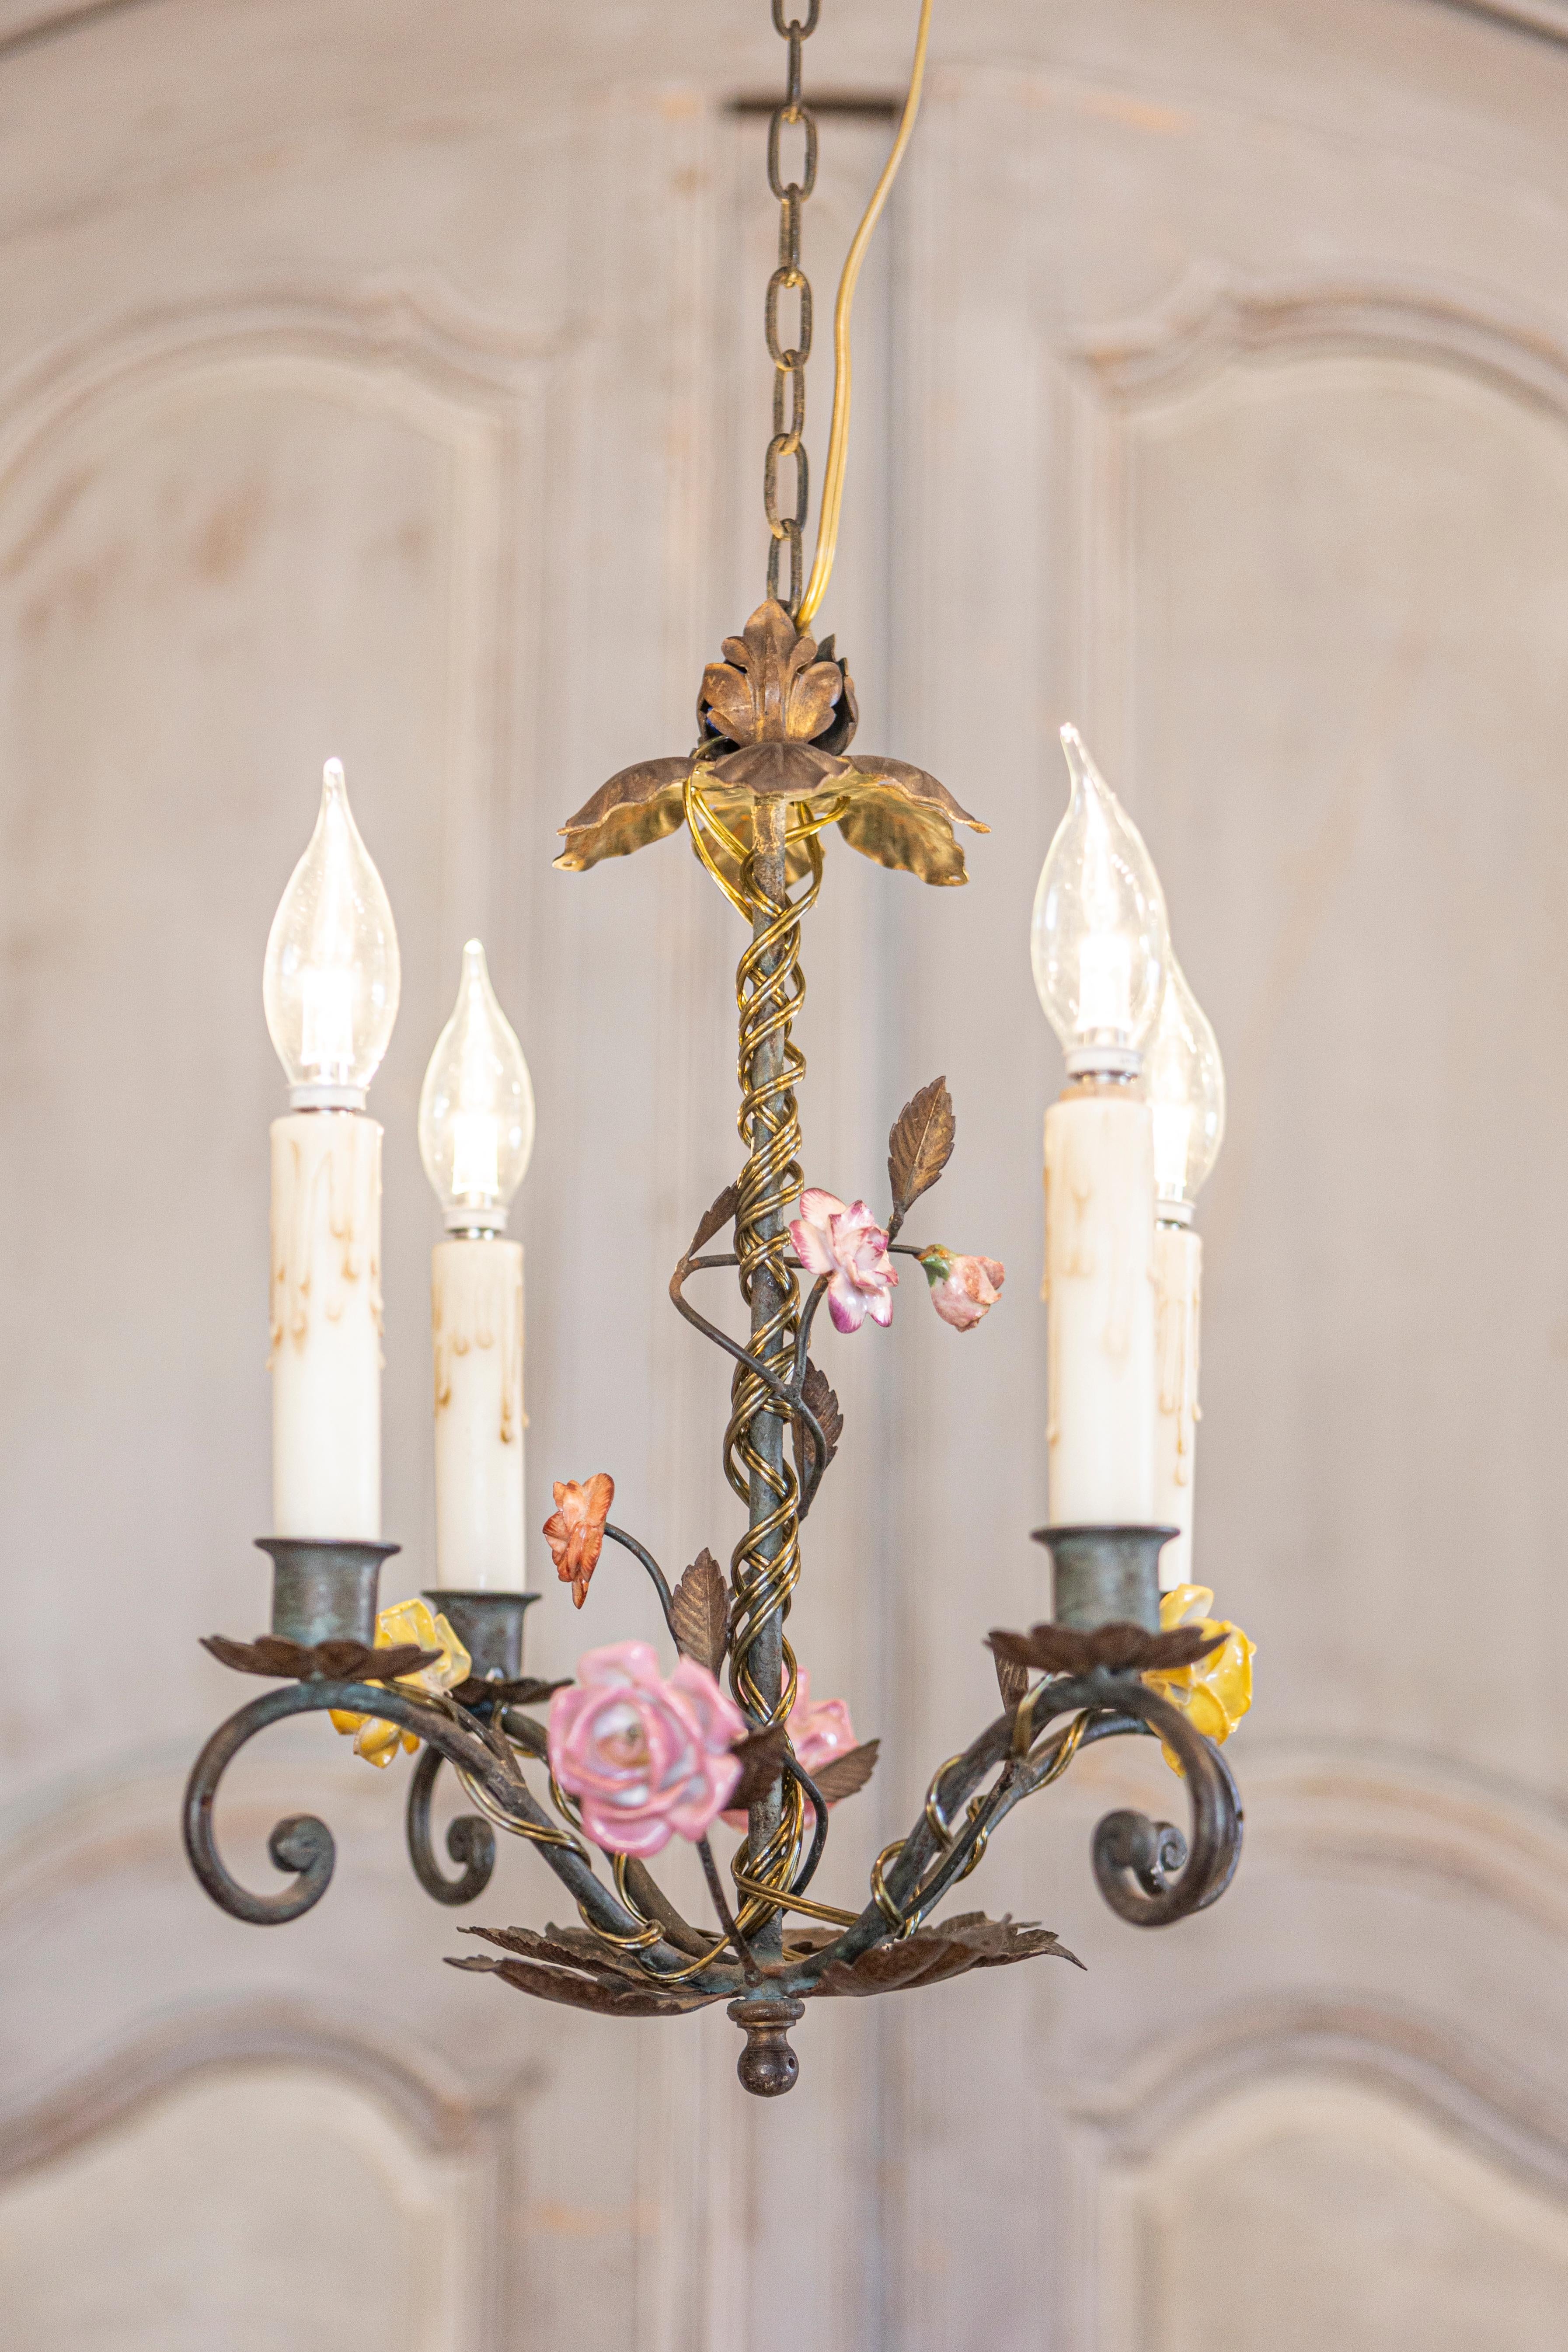 French Four-Light Chandelier with Hand-Painted Porcelain Roses and Foliage In Good Condition For Sale In Atlanta, GA